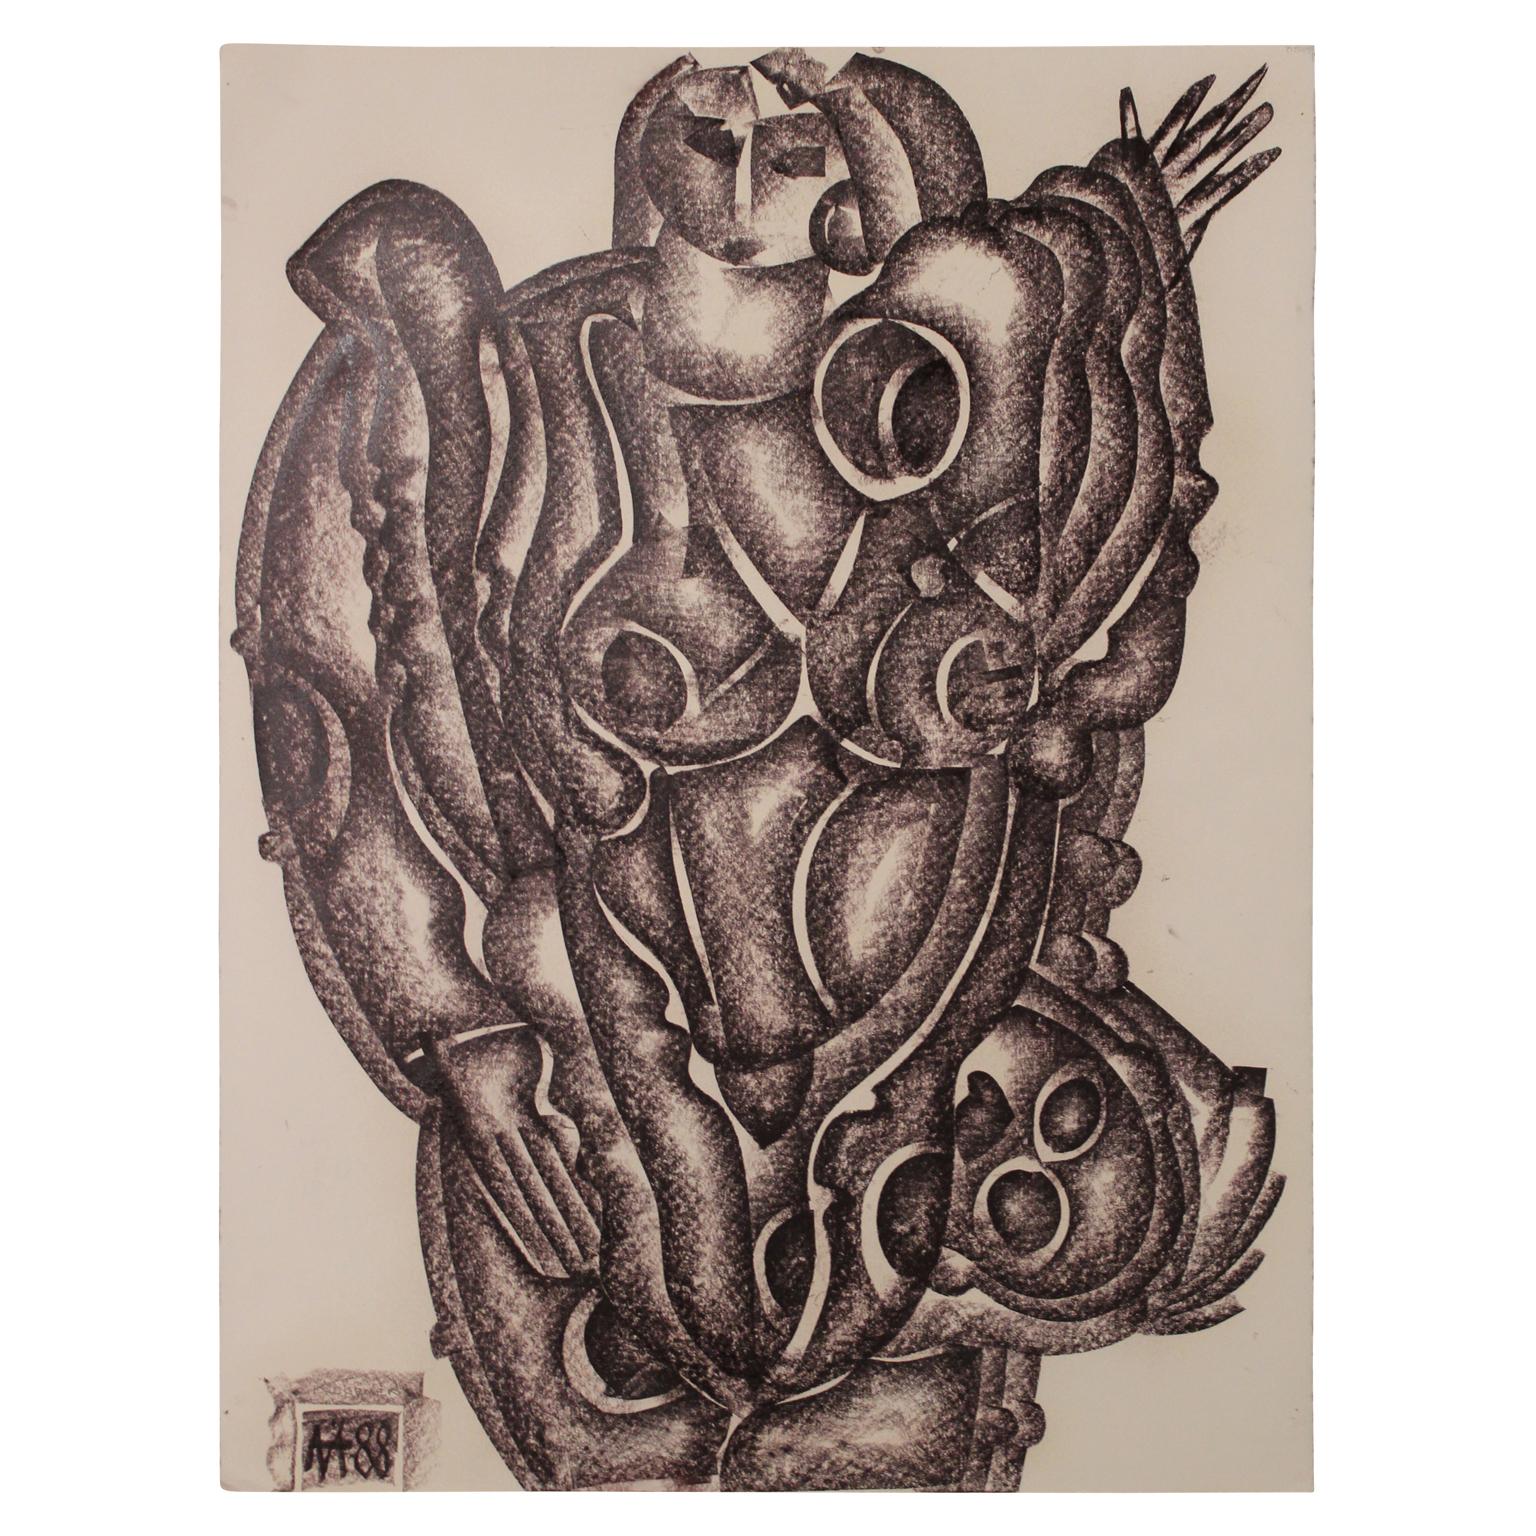 Abstract Cubist Charcoal Drawing of a Standing Woman - Mixed Media Art by Valery Kleveroy (Klever)